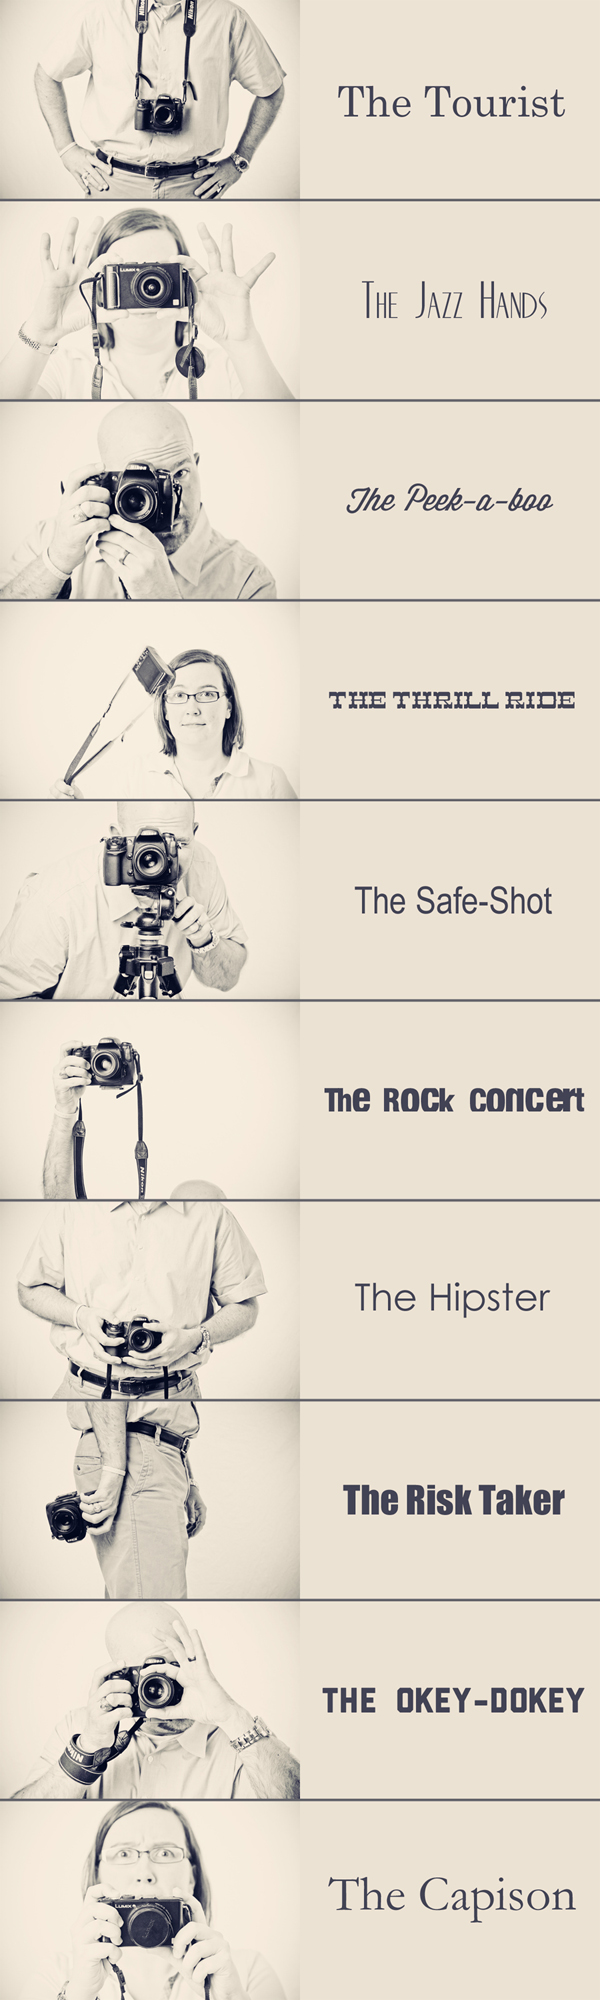 Info graphic detailing the different ways people hold cameras